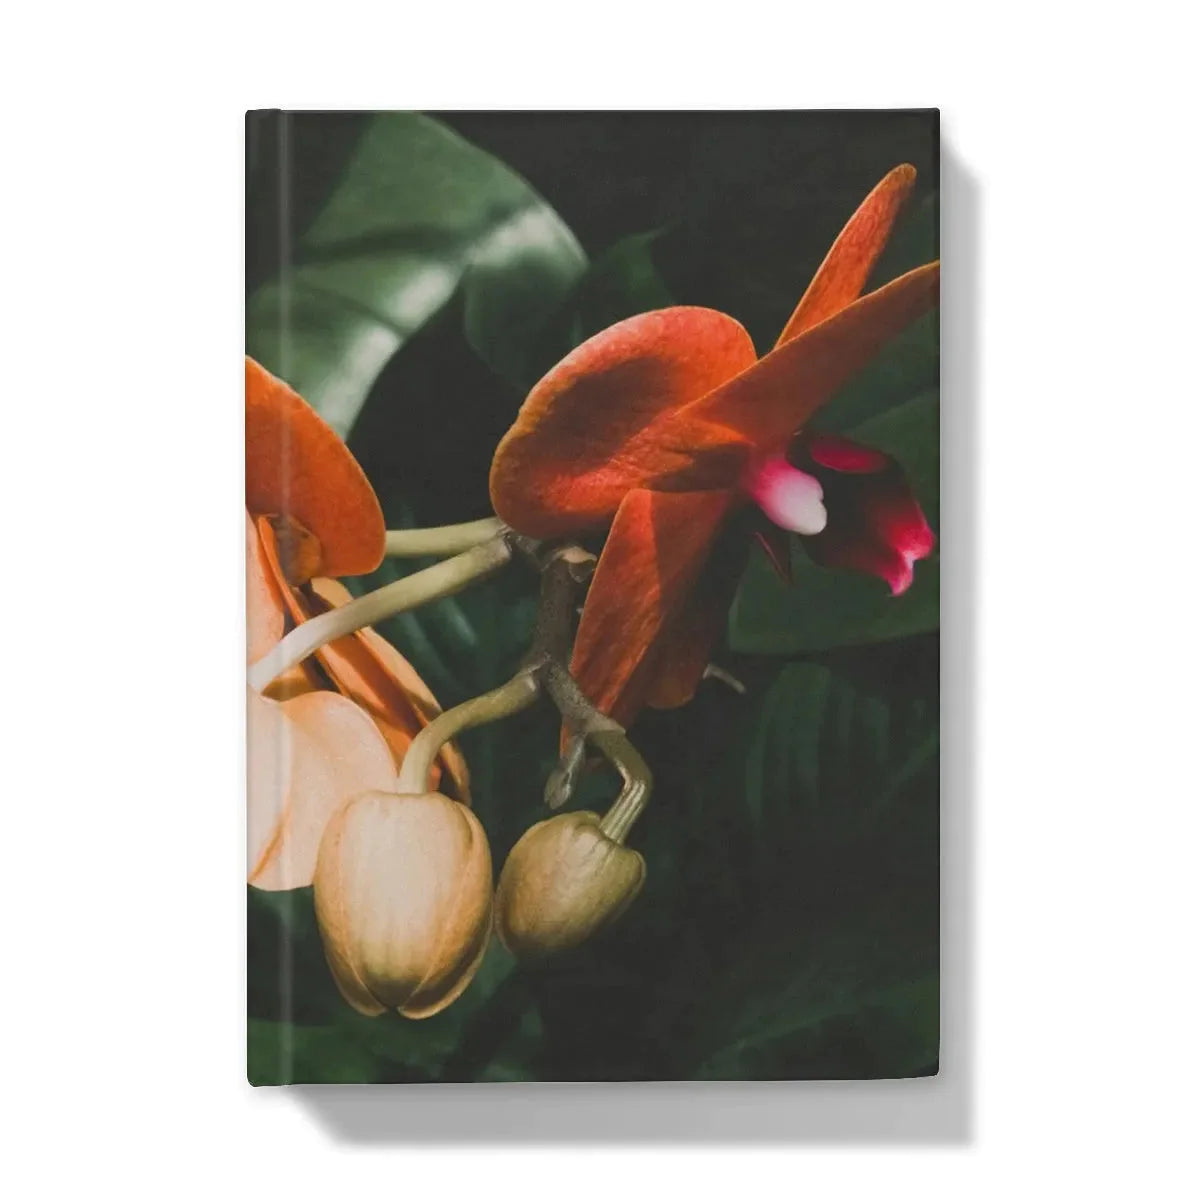 Floral Coral Hardback Journal - 5’x7’ / 5’ x 7’ - Lined Paper - Notebooks & Notepads - Aesthetic Art